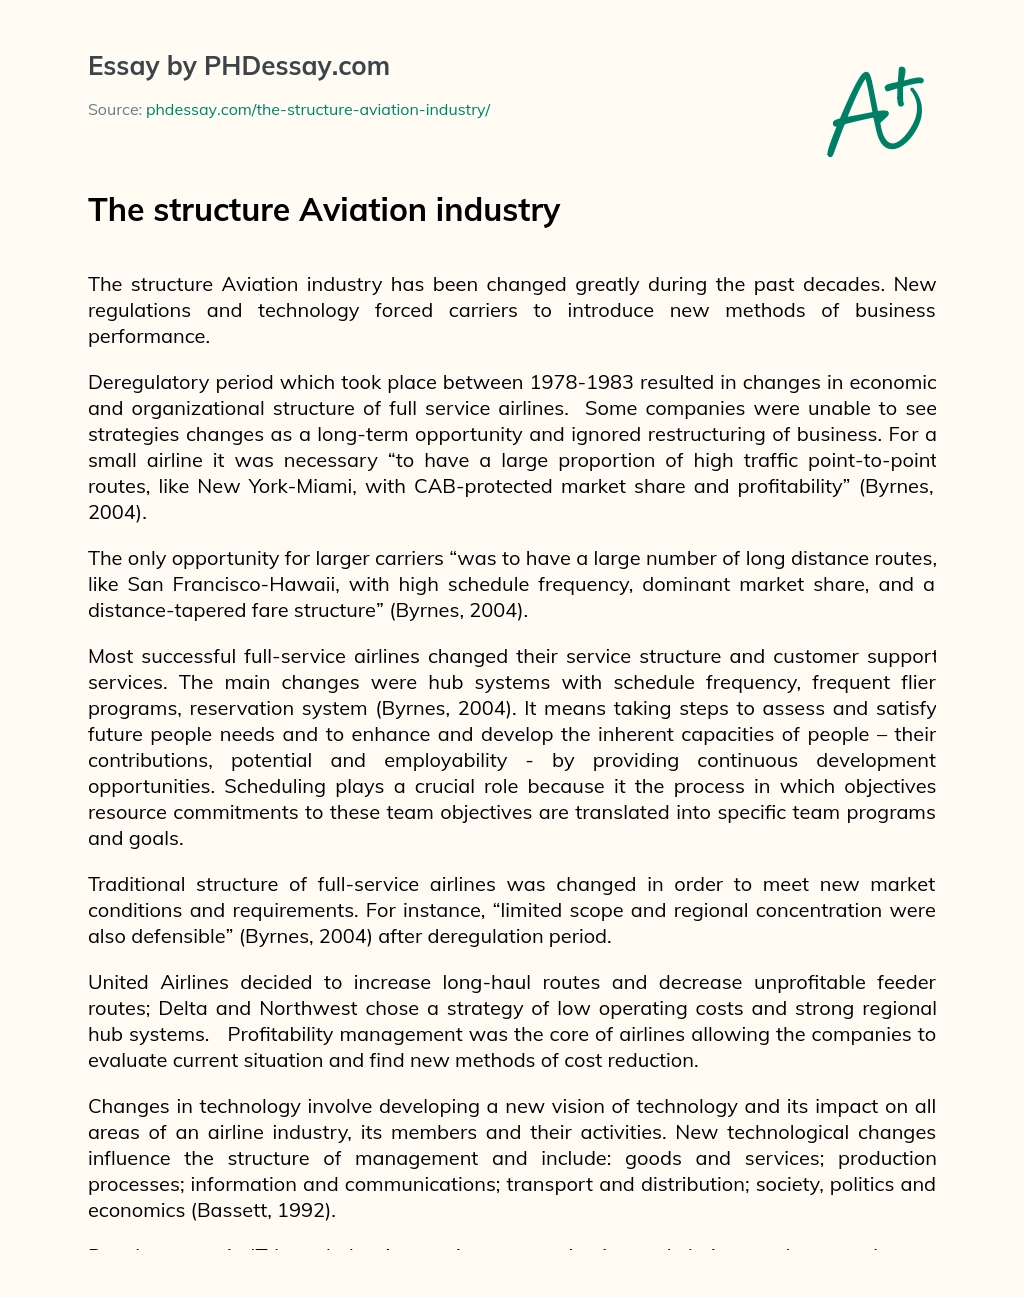 The structure Aviation industry essay